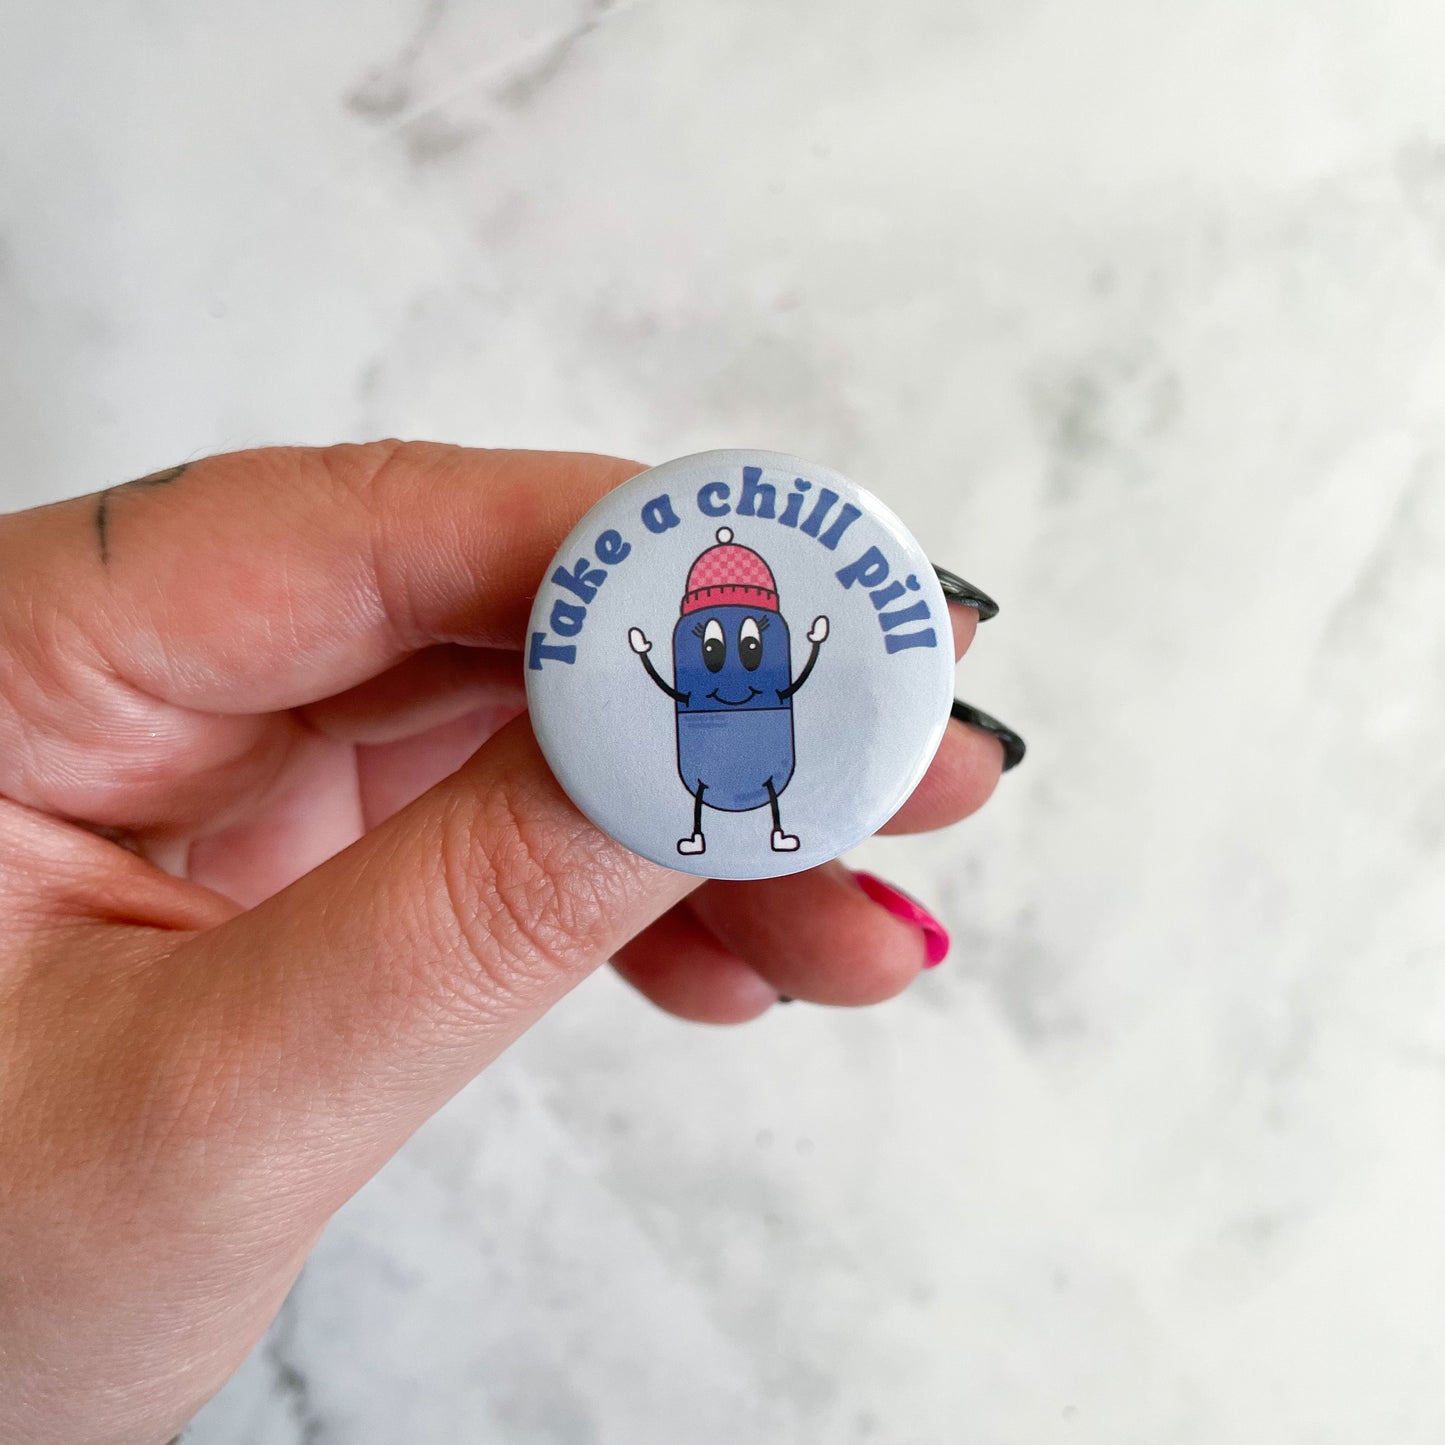 Take A Chill Pill Button / Badge (Buy 4 Get 1 FREE)